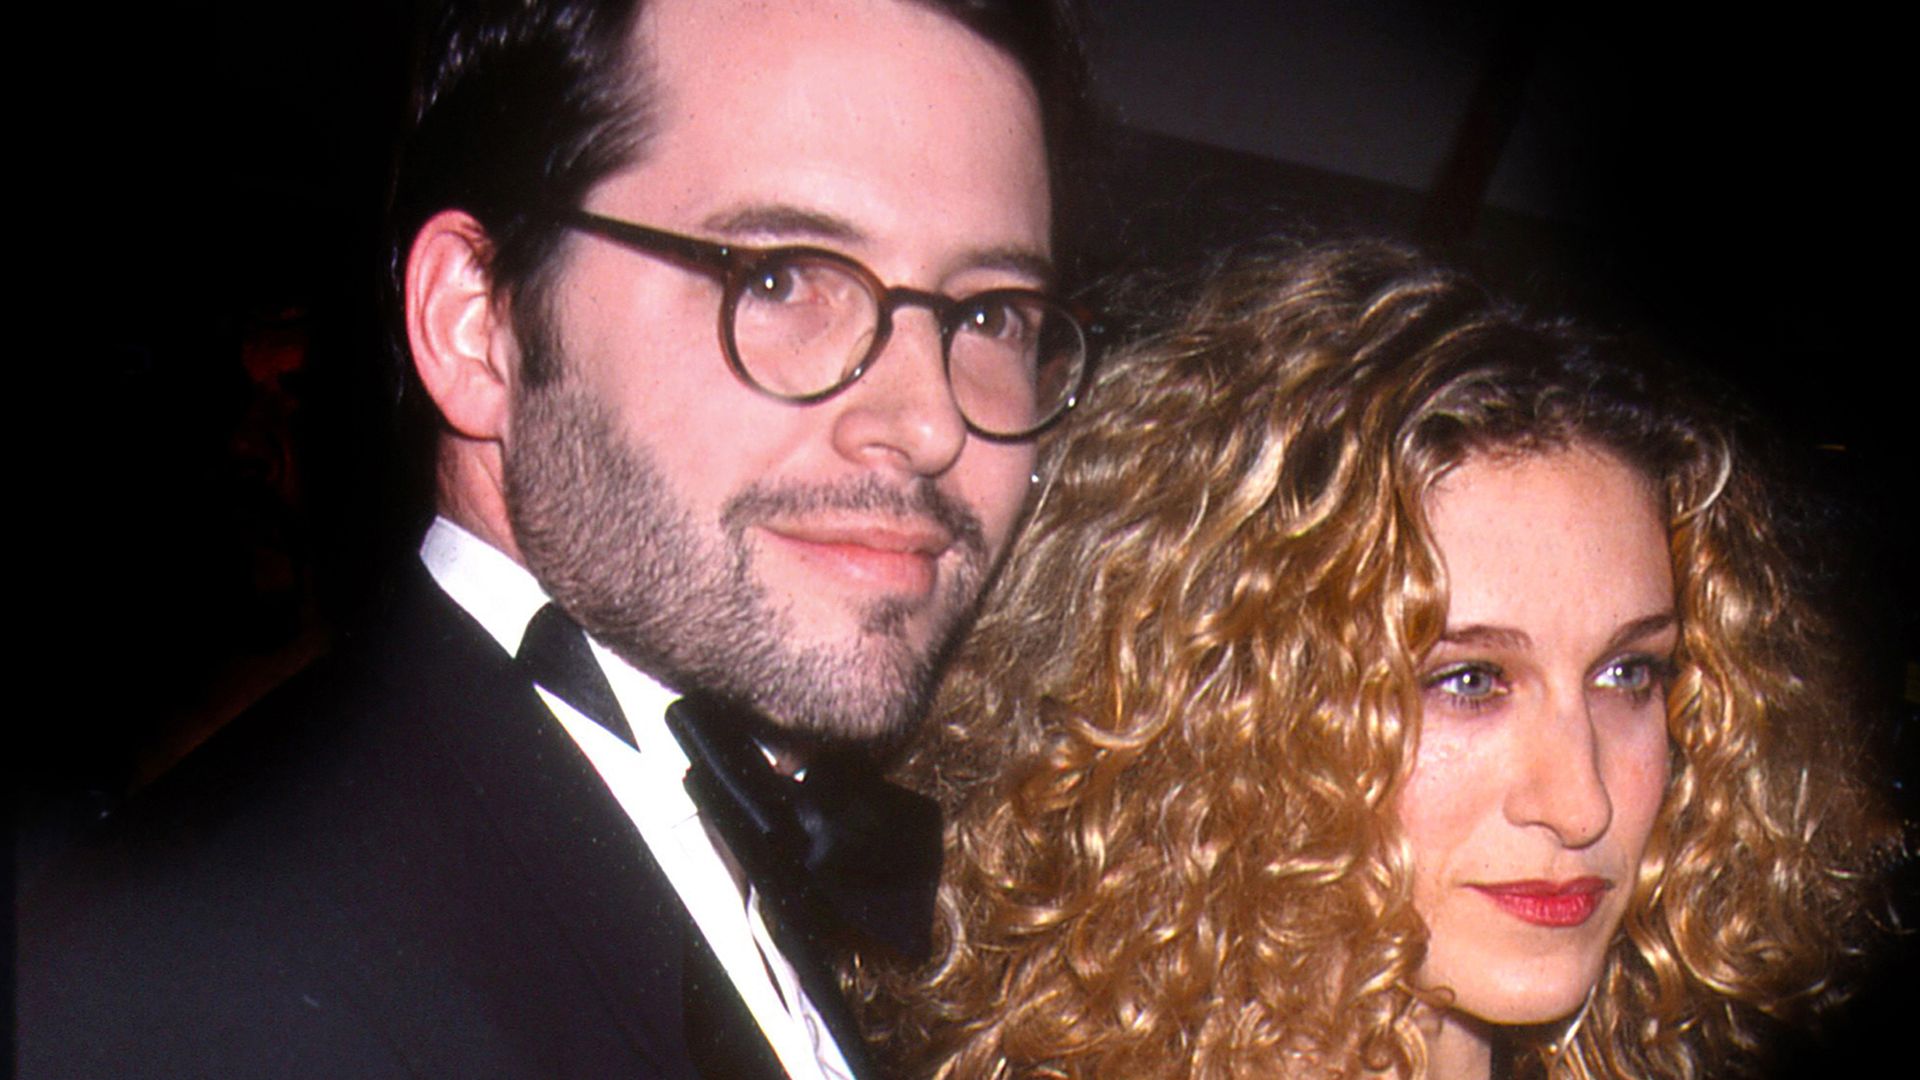 Matthew Broderick in a suit and bow tie and Sarah Jessica Parker in a black sparkly dress and red lipstick